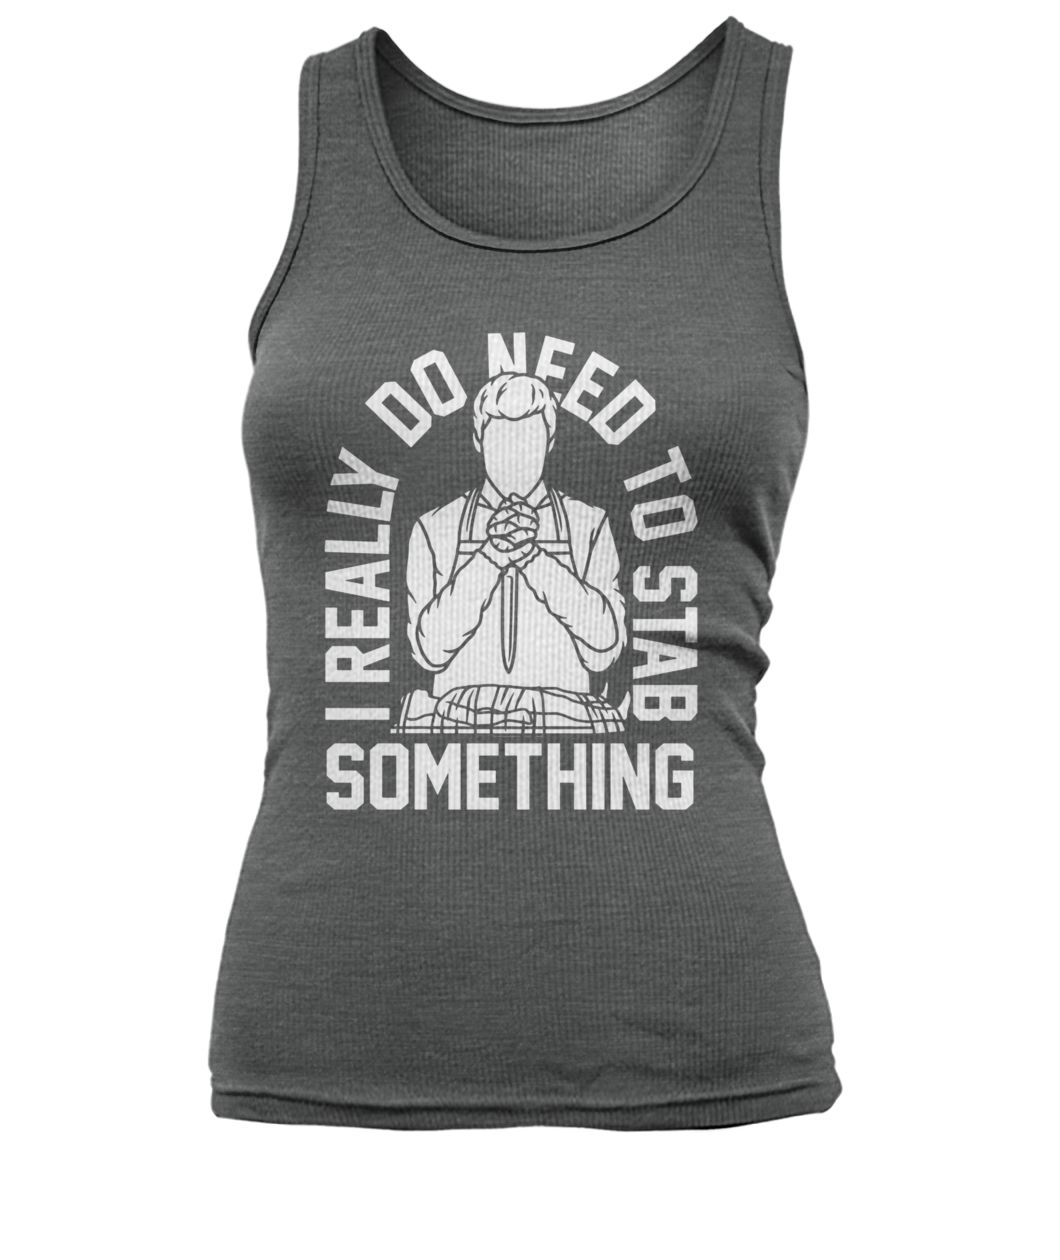 I really do need to stab something women's tank top